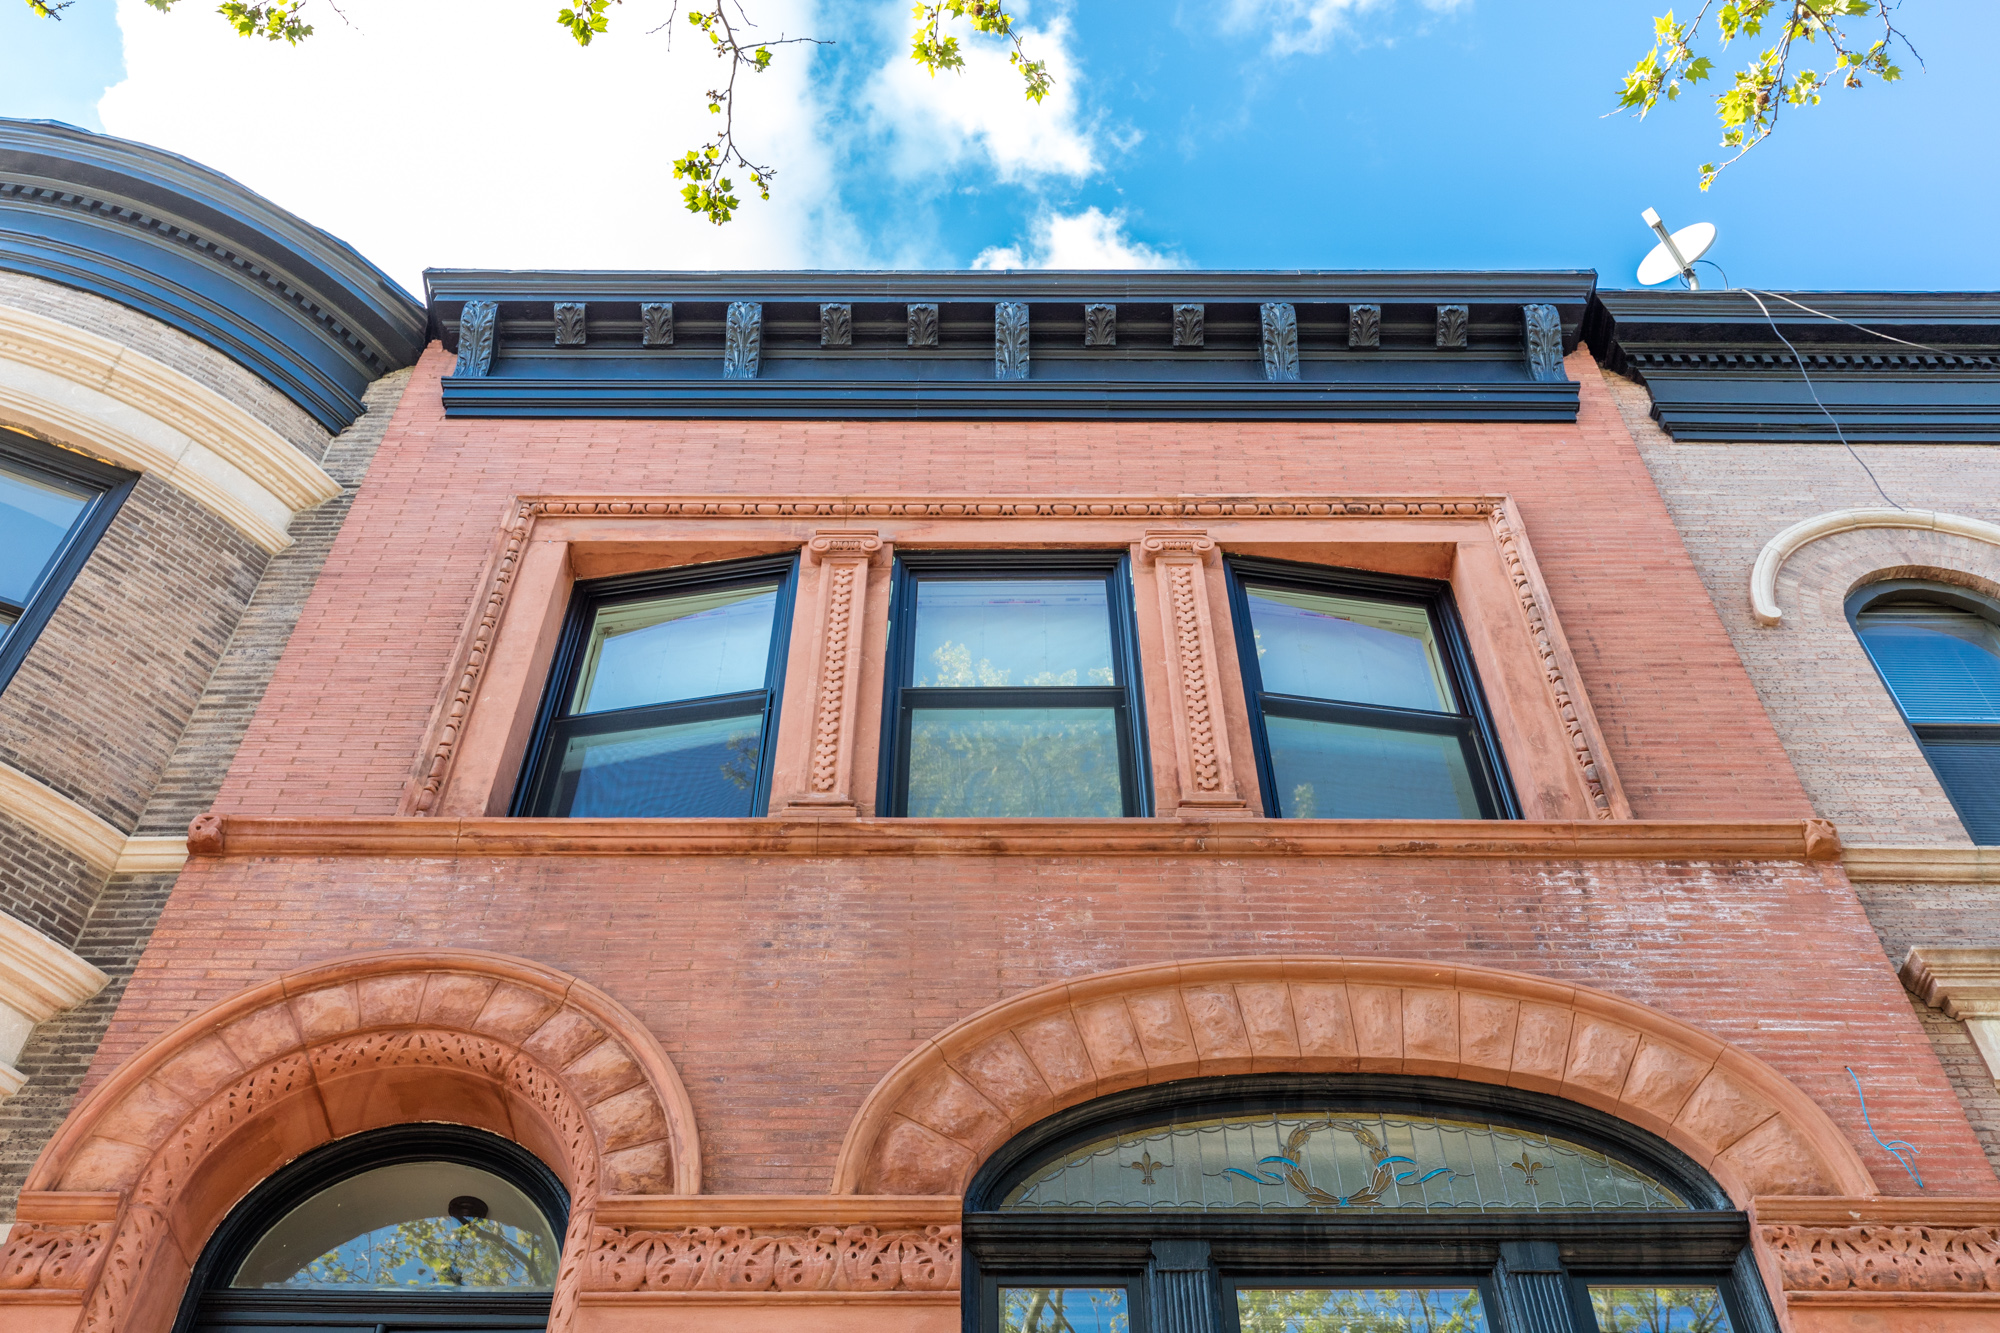 Facade restoration is nearly complete on this historic Brooklyn townhouse.